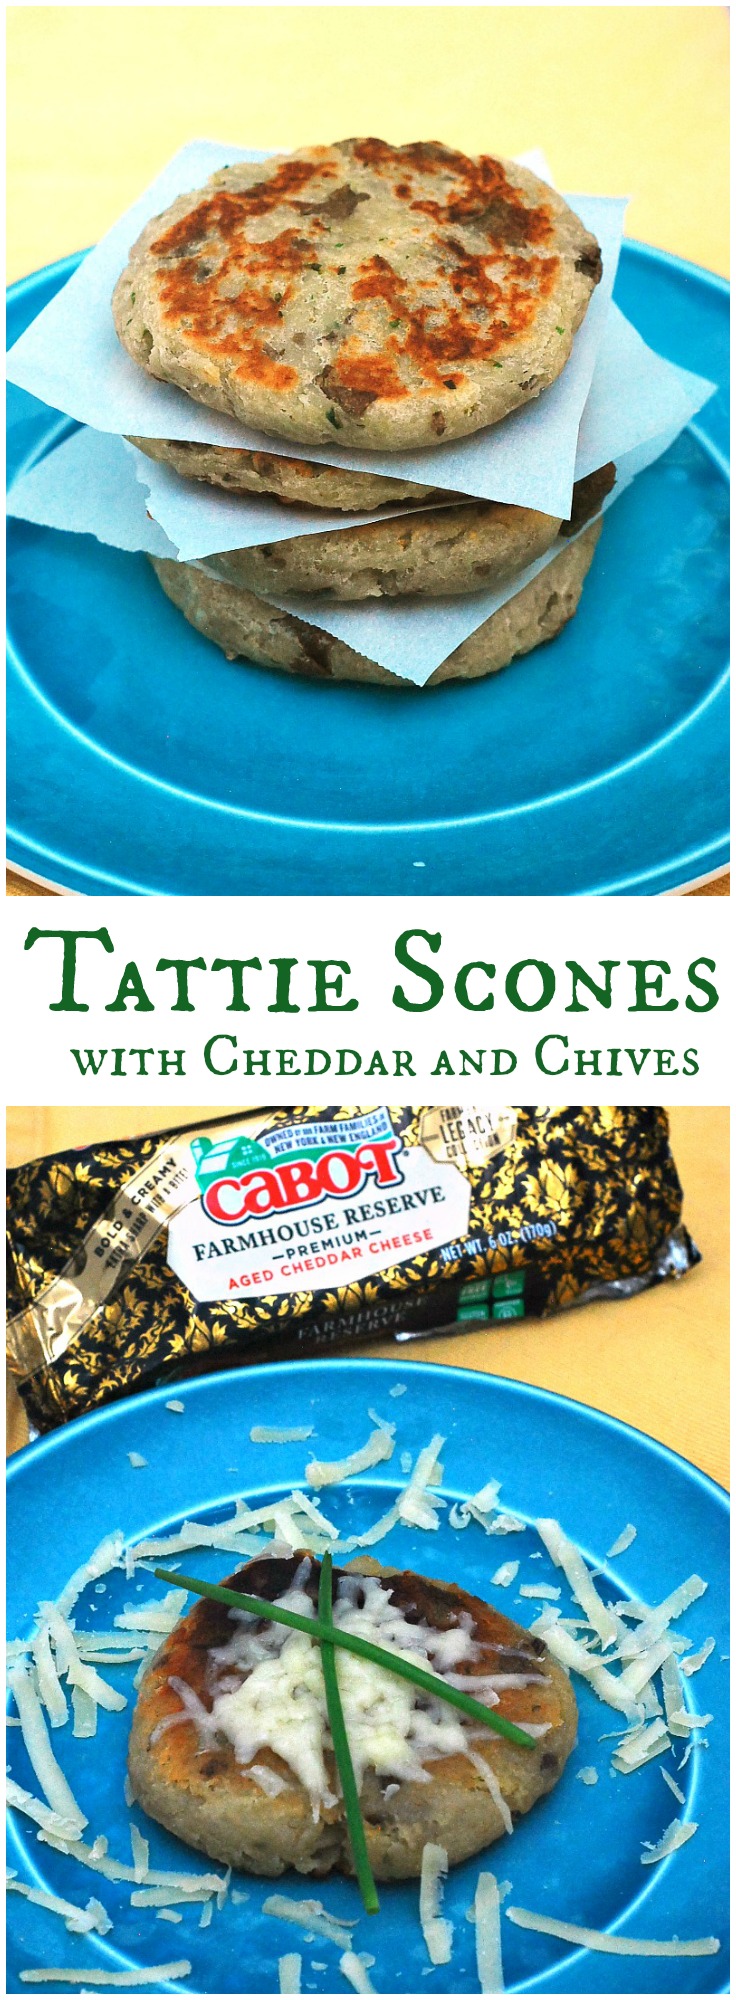 Scottish tattie scones, aka potato scones, resemble pancakes more than typical scones. They combine potatoes, flour, and butter and are sauteed on a griddle. #BrunchWeek theredheadbaker.com